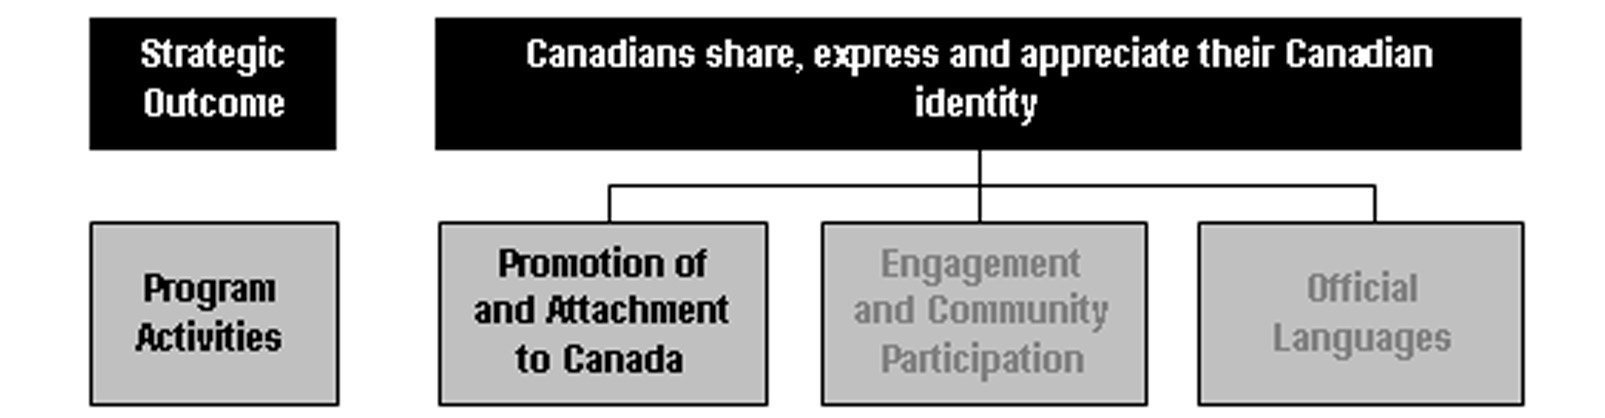 Program Activity 4: Promotion of and Attachment to Canada